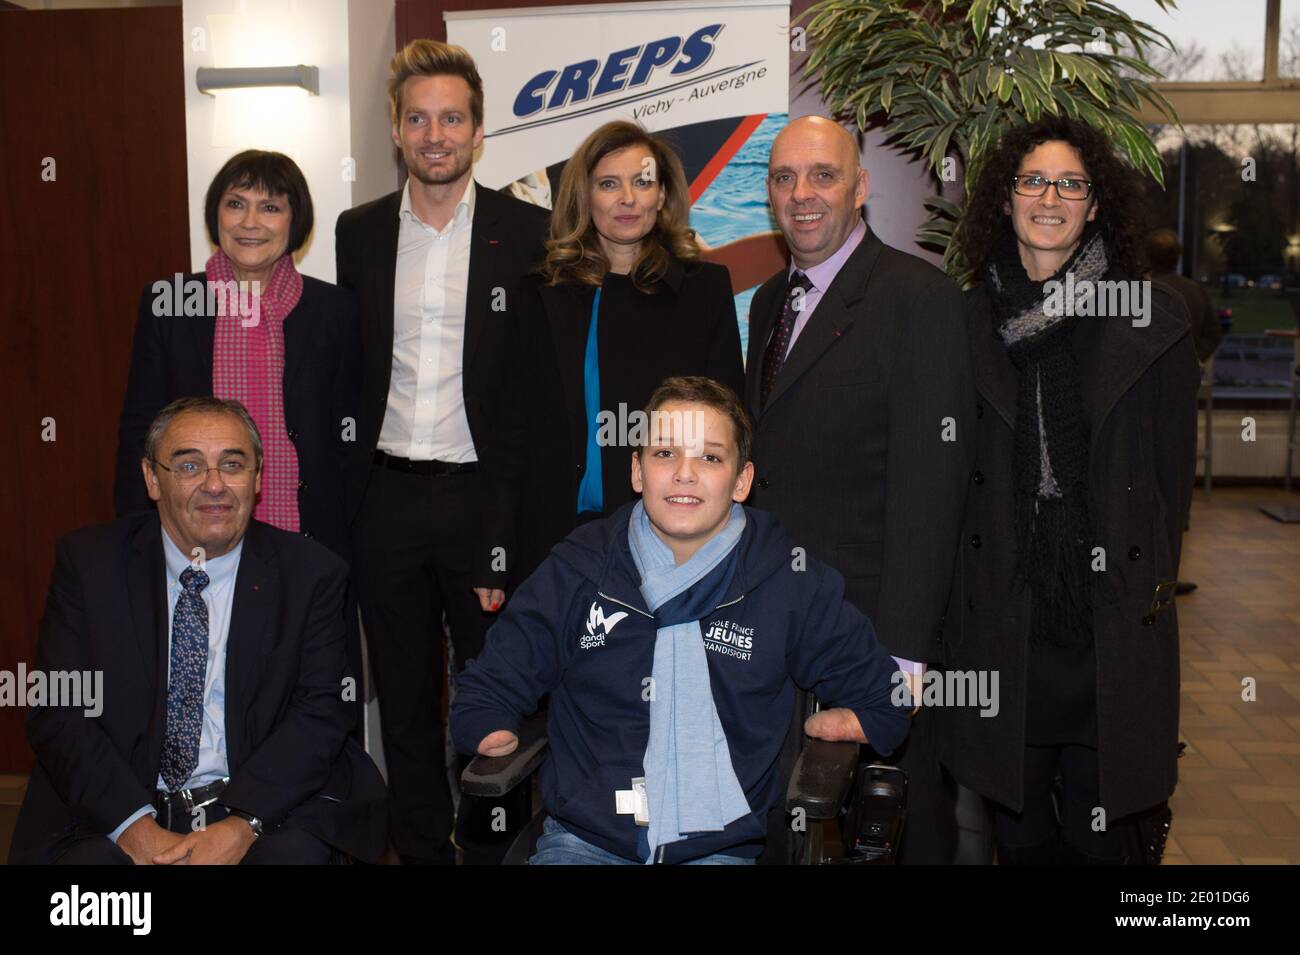 Companion of France's President Valerie Trierweiler and Marie-Arlette Carlotti pose with Theo, a 13-year-old 4-limb amputee, as part of her visit on November 27, 2013 in Vichy, central France. Theo is a grant holder of the disabled sports branch of the French Expertise and Performance Ressource Centre (CREPS) of Vichy Auvergne, where he trains in swimming. In early 2013, he competed for the first time in the French disabled swimming championships. Photo by Christophe Guibbaud/ABACAPRESS.COM Stock Photo